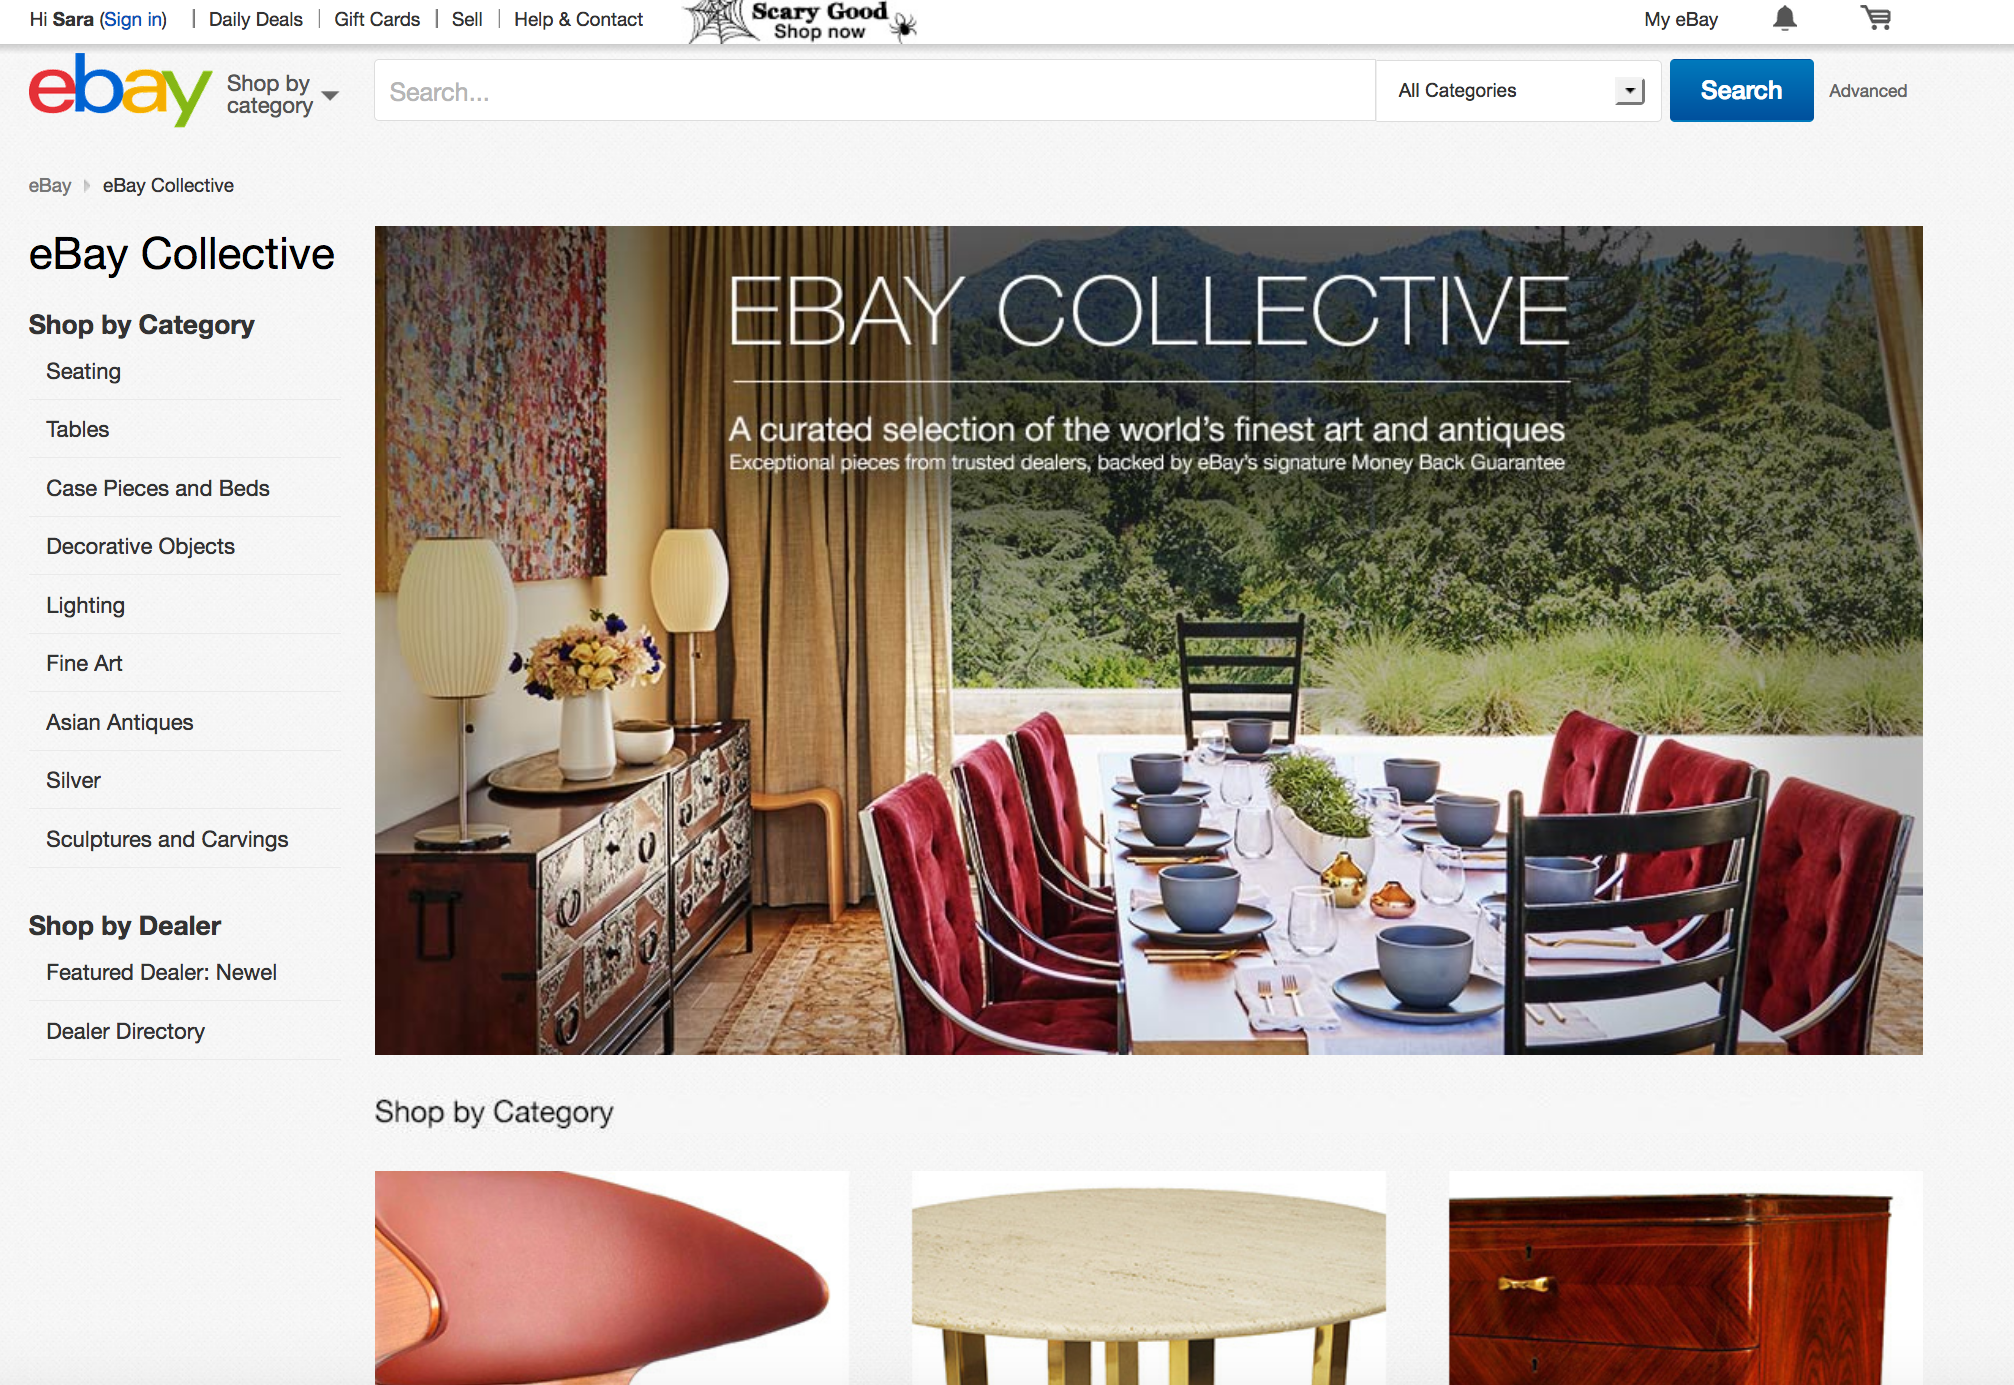 eBay Collective, a new portal for curated antiques, furniture and art